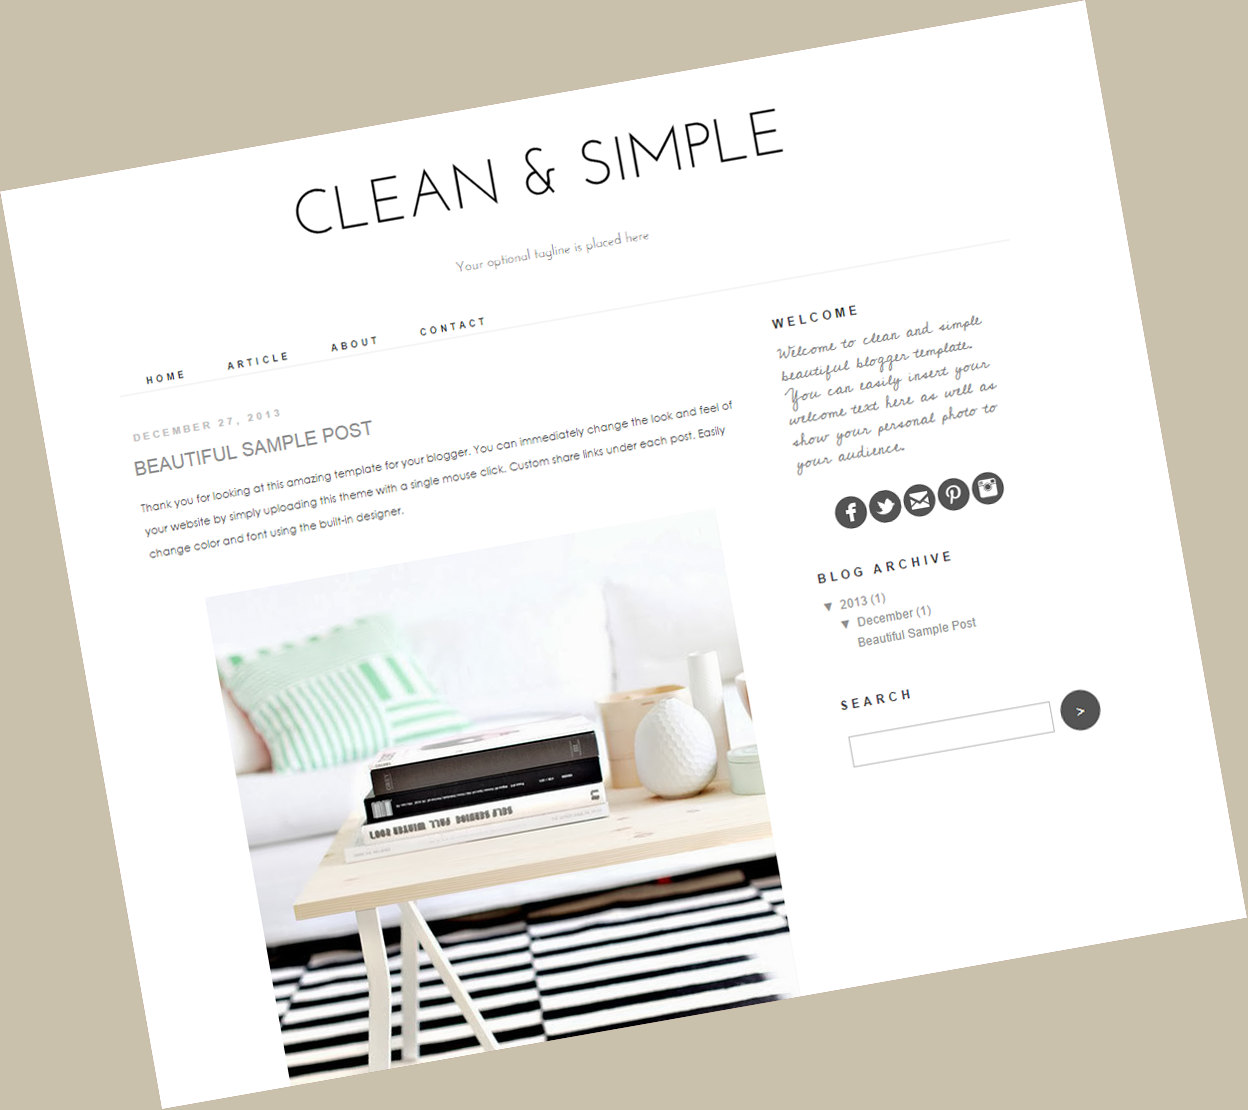 Free Responsive Blogger Template Clean and Simple